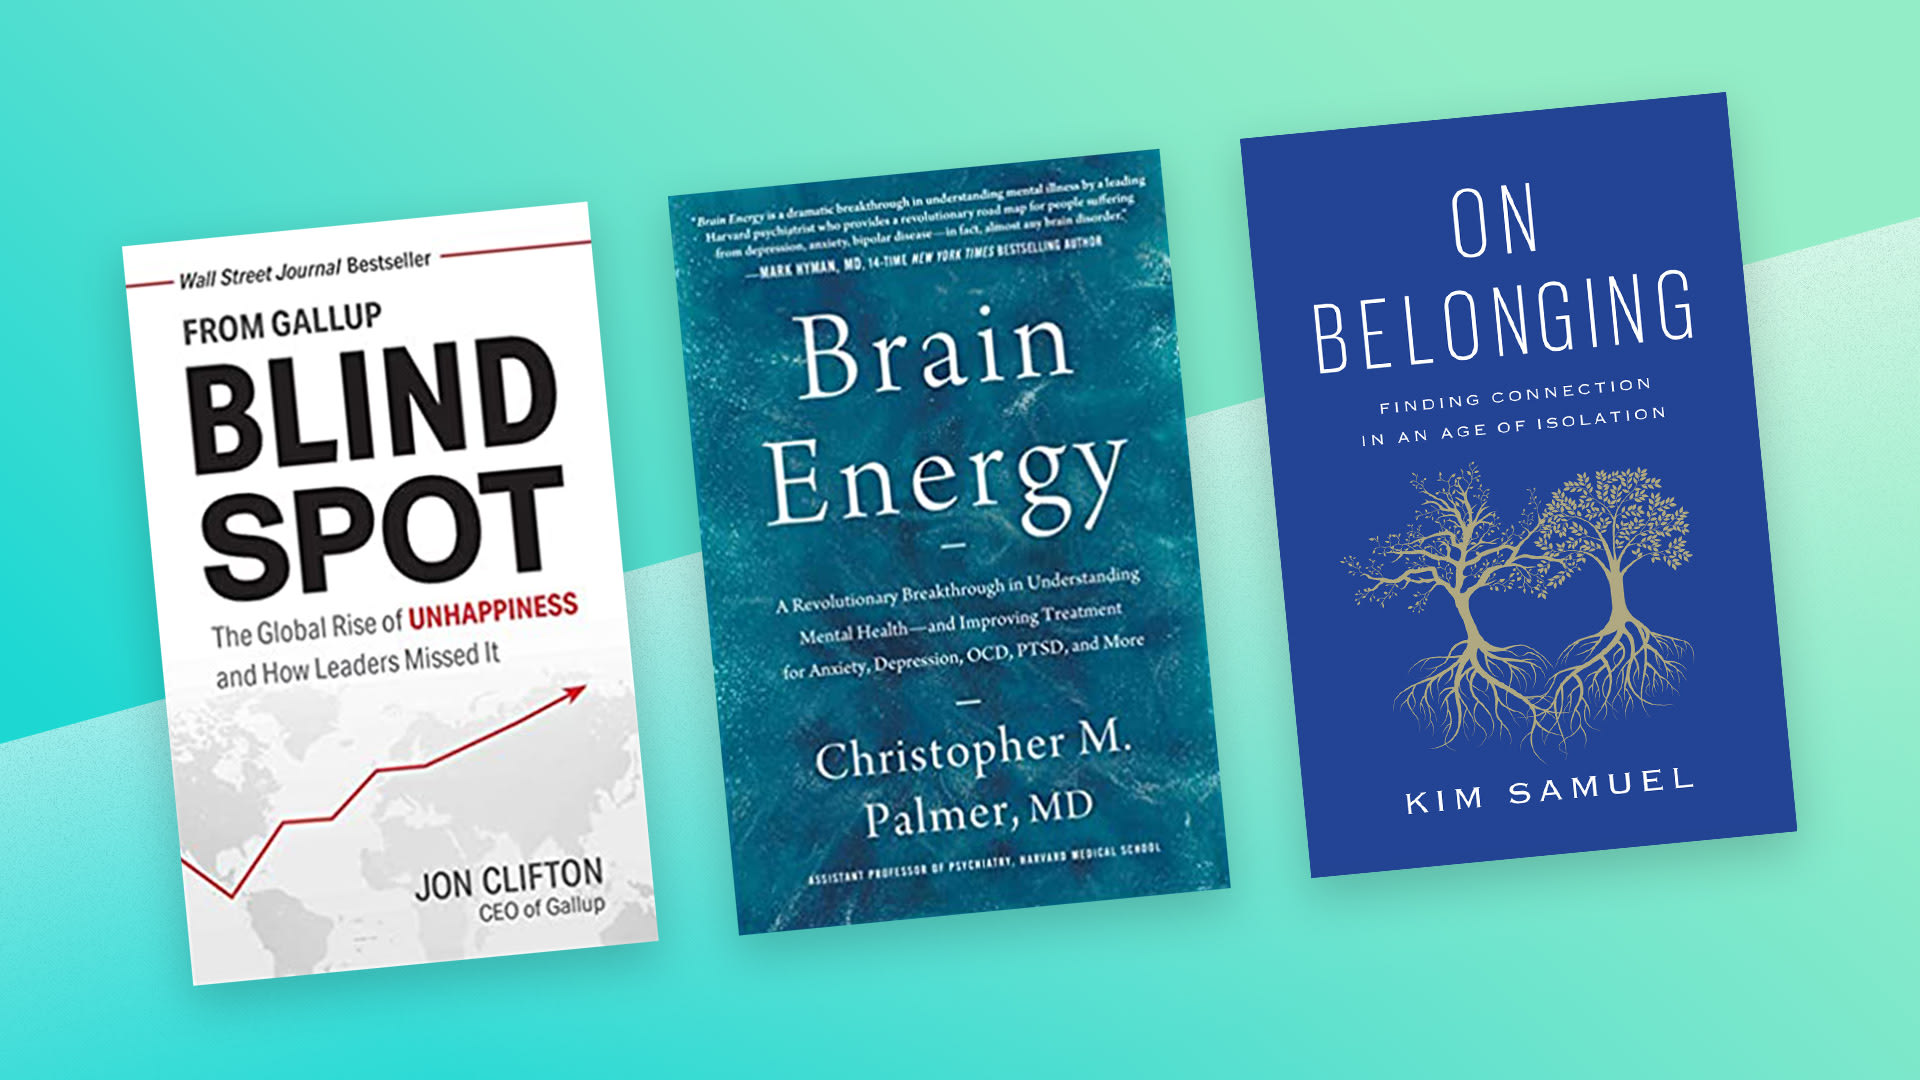 3 MustRead Books to Help Improve Your Mental Health